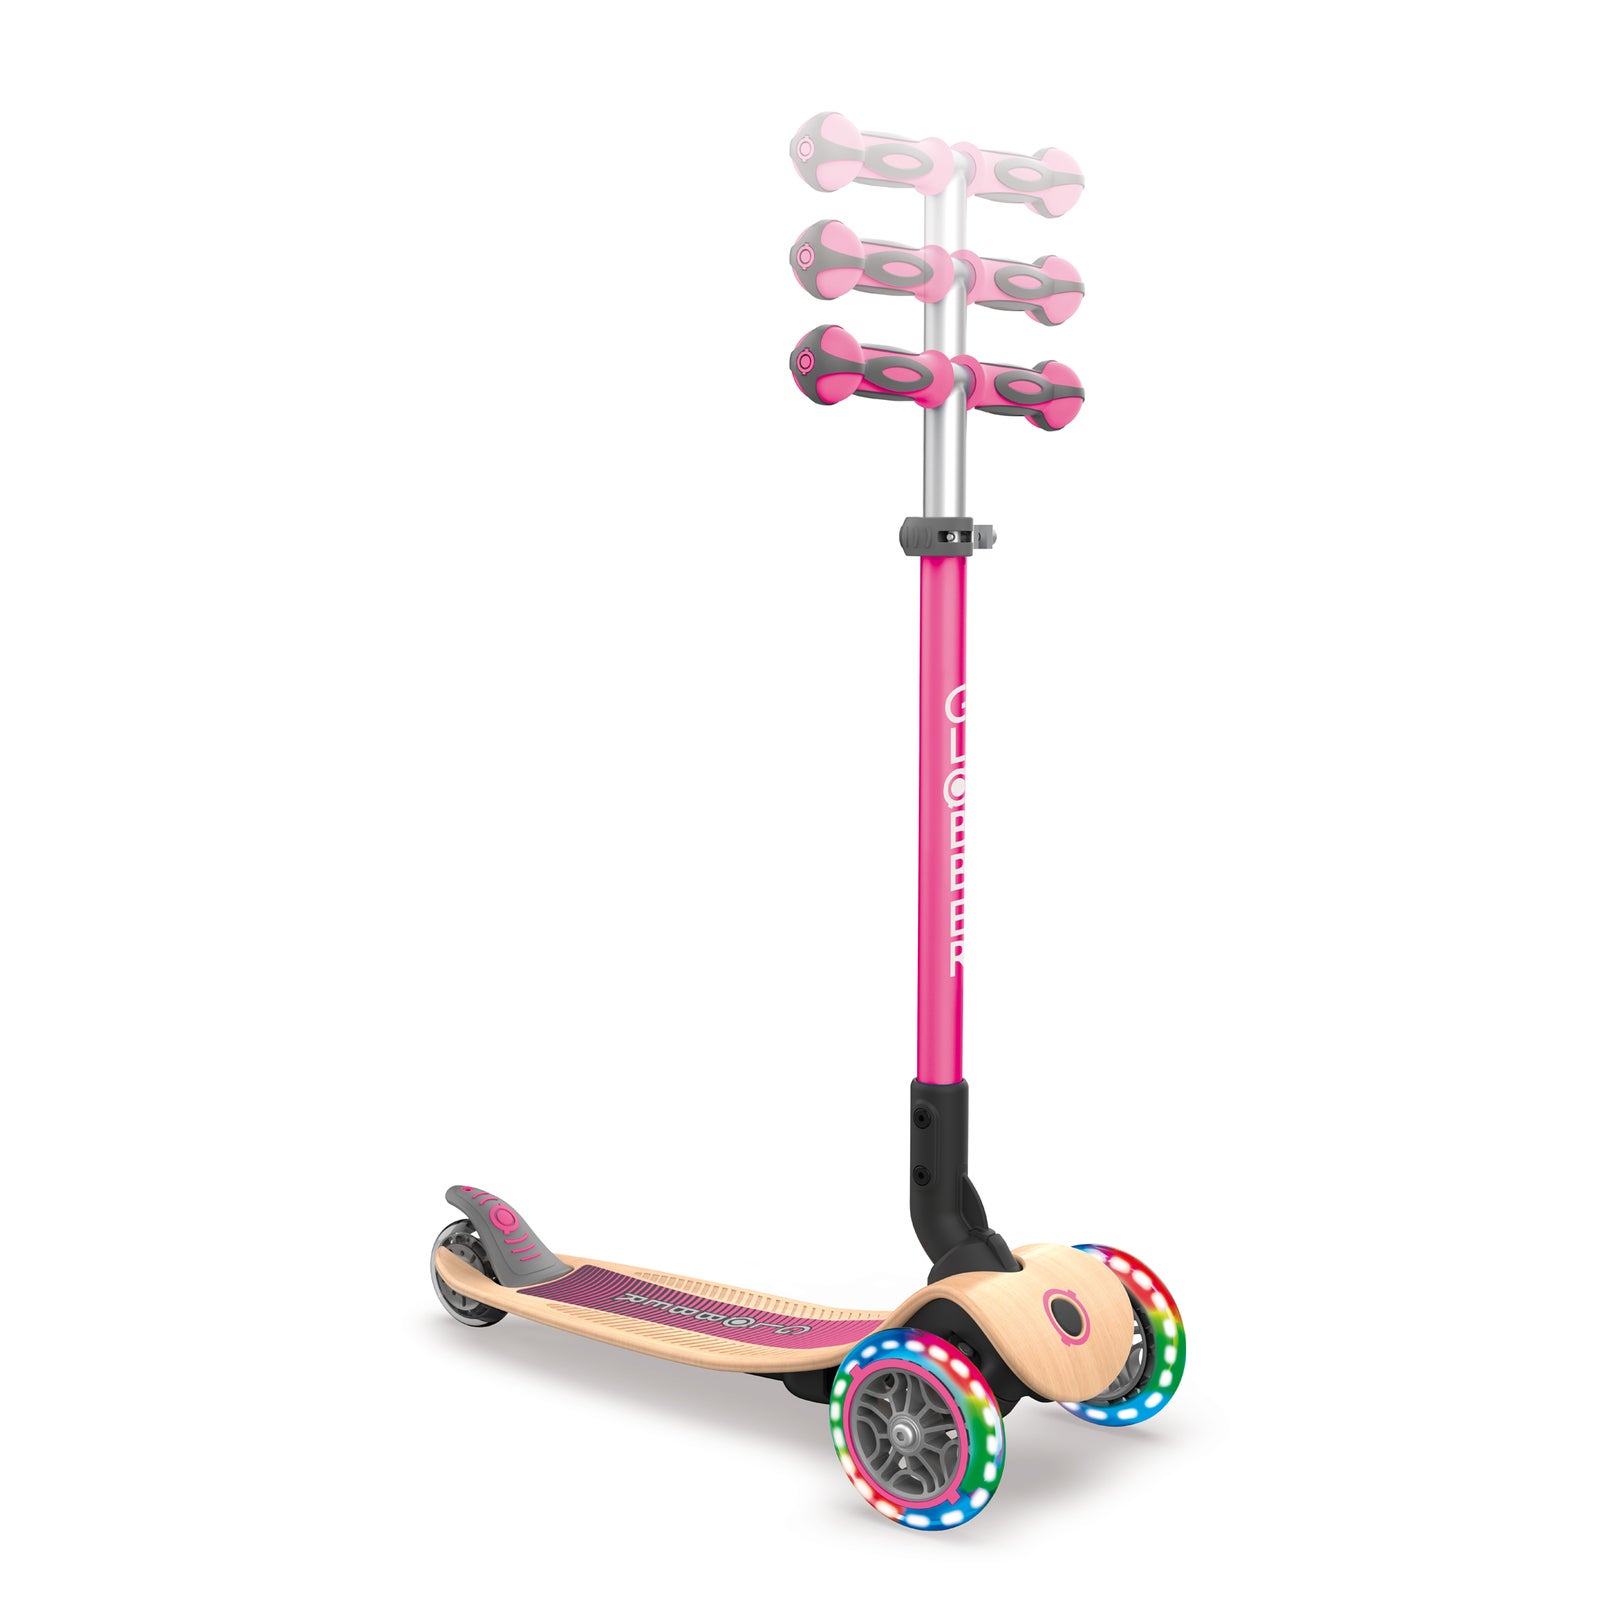 Globber Primo Foldable Push Scooter Wood w/Lights - Pink (G436-110)